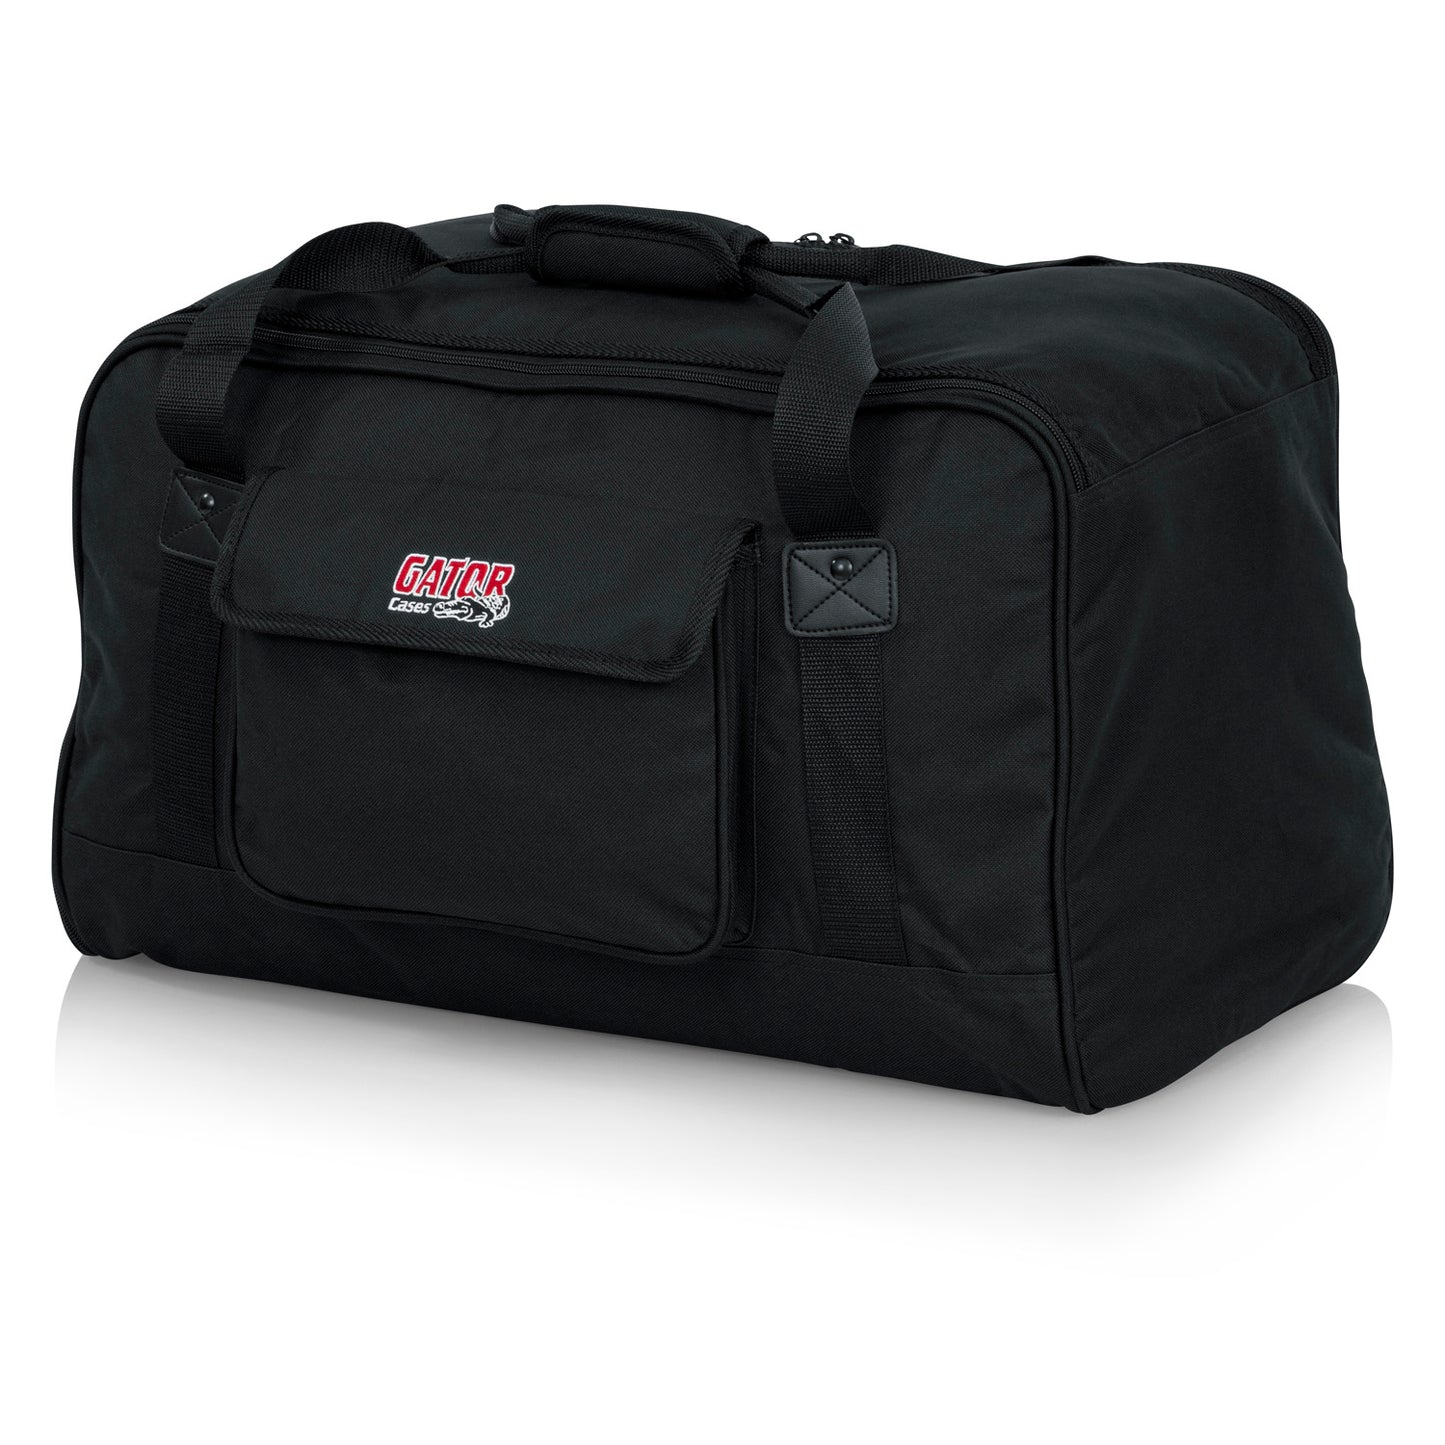 Gator GPA-TOTE10 Heavy-Duty Speaker Tote Bag for Compact 10" Cabinets